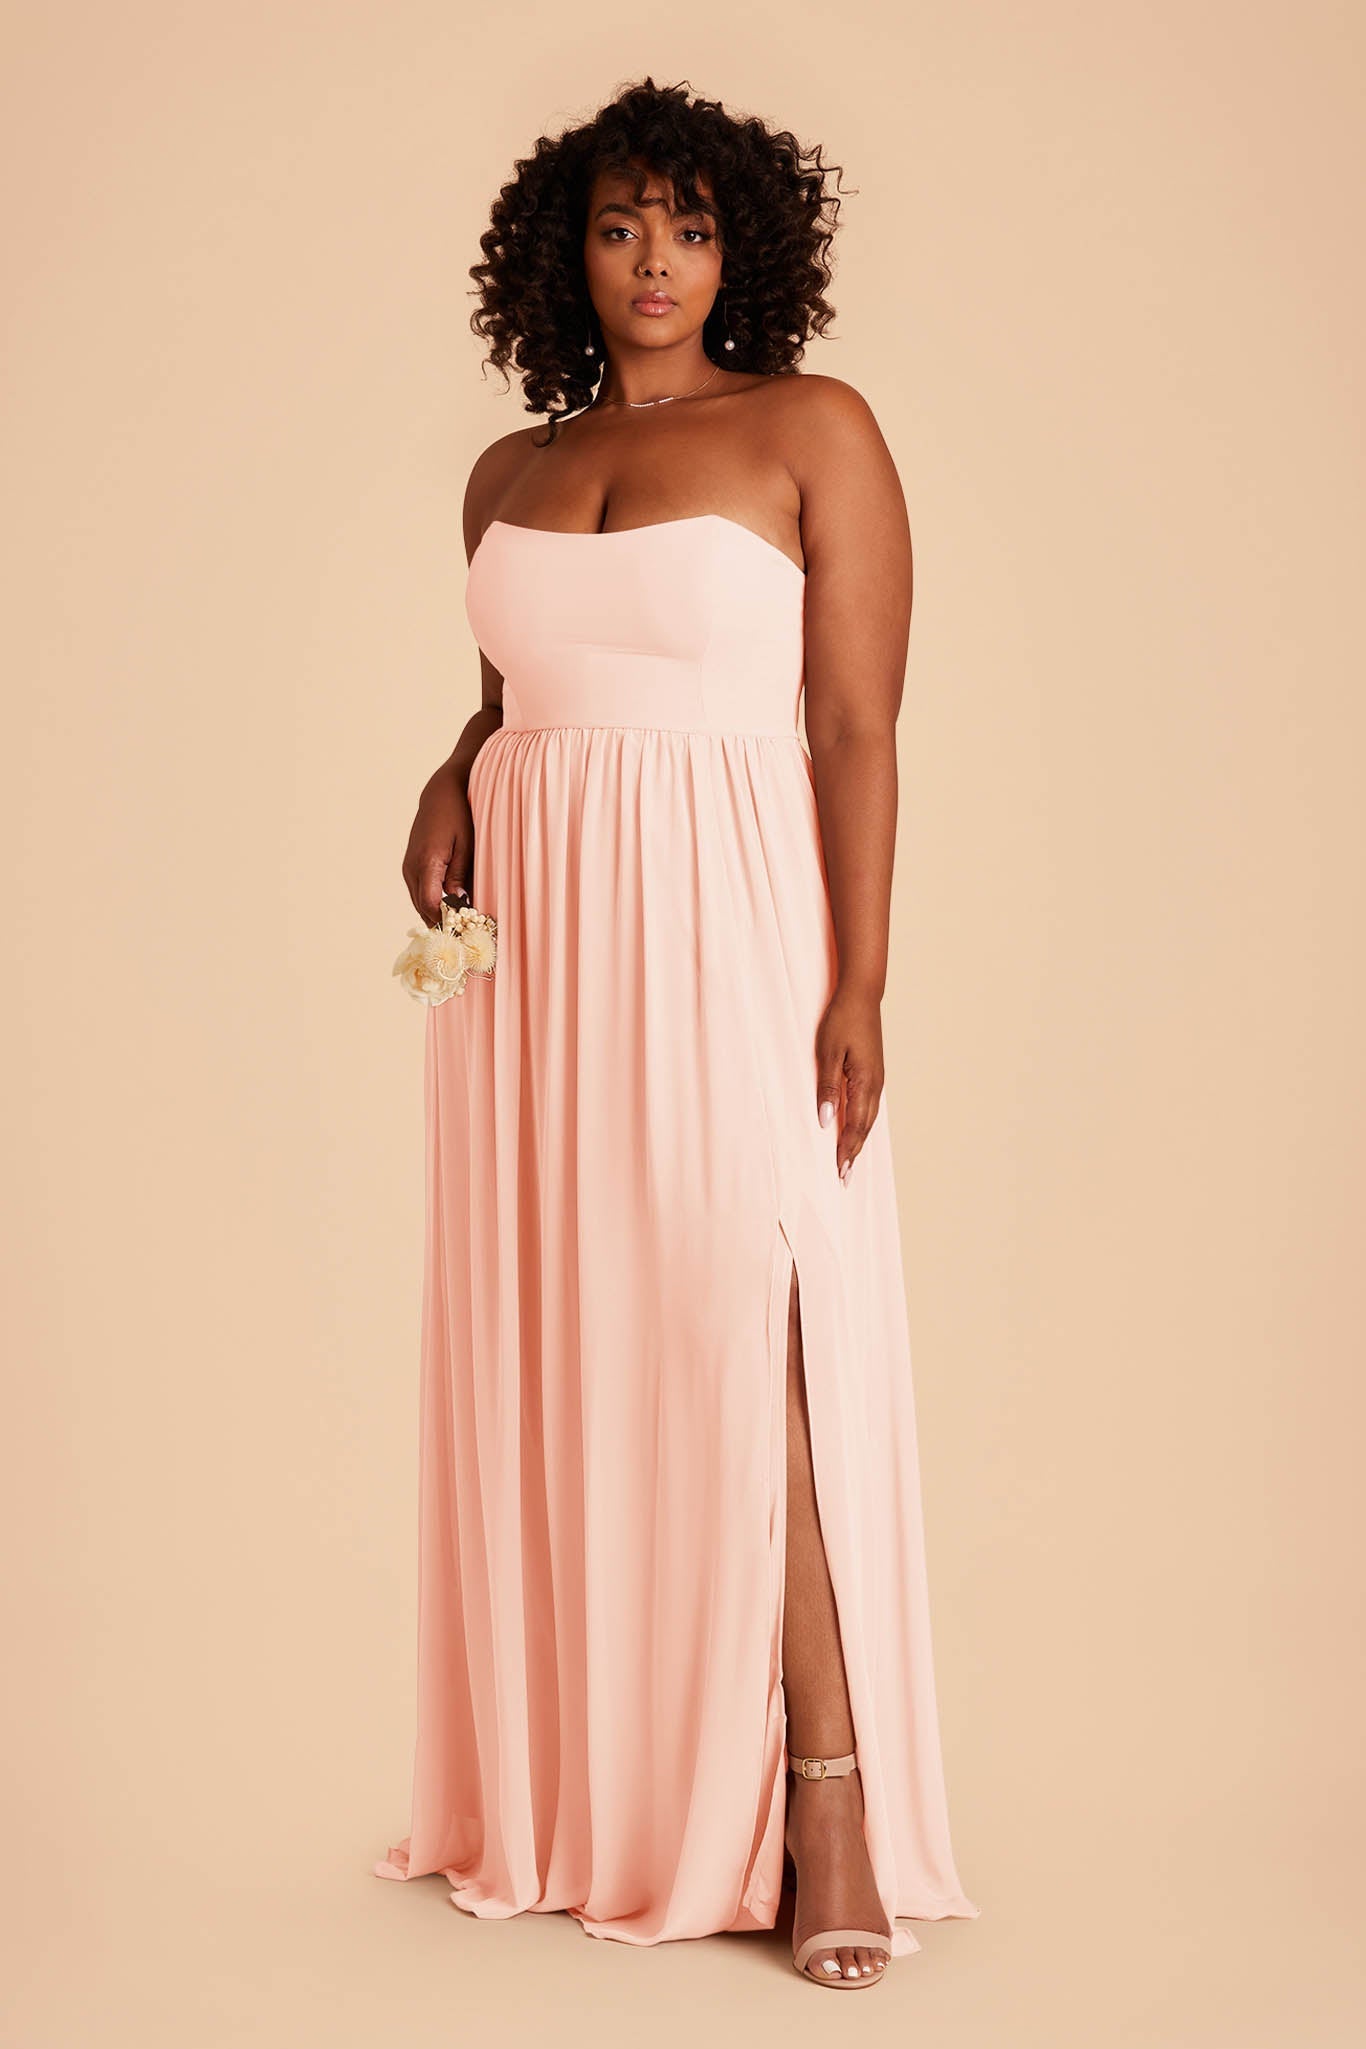 Blush Pink August Convertible Dress by Birdy Grey